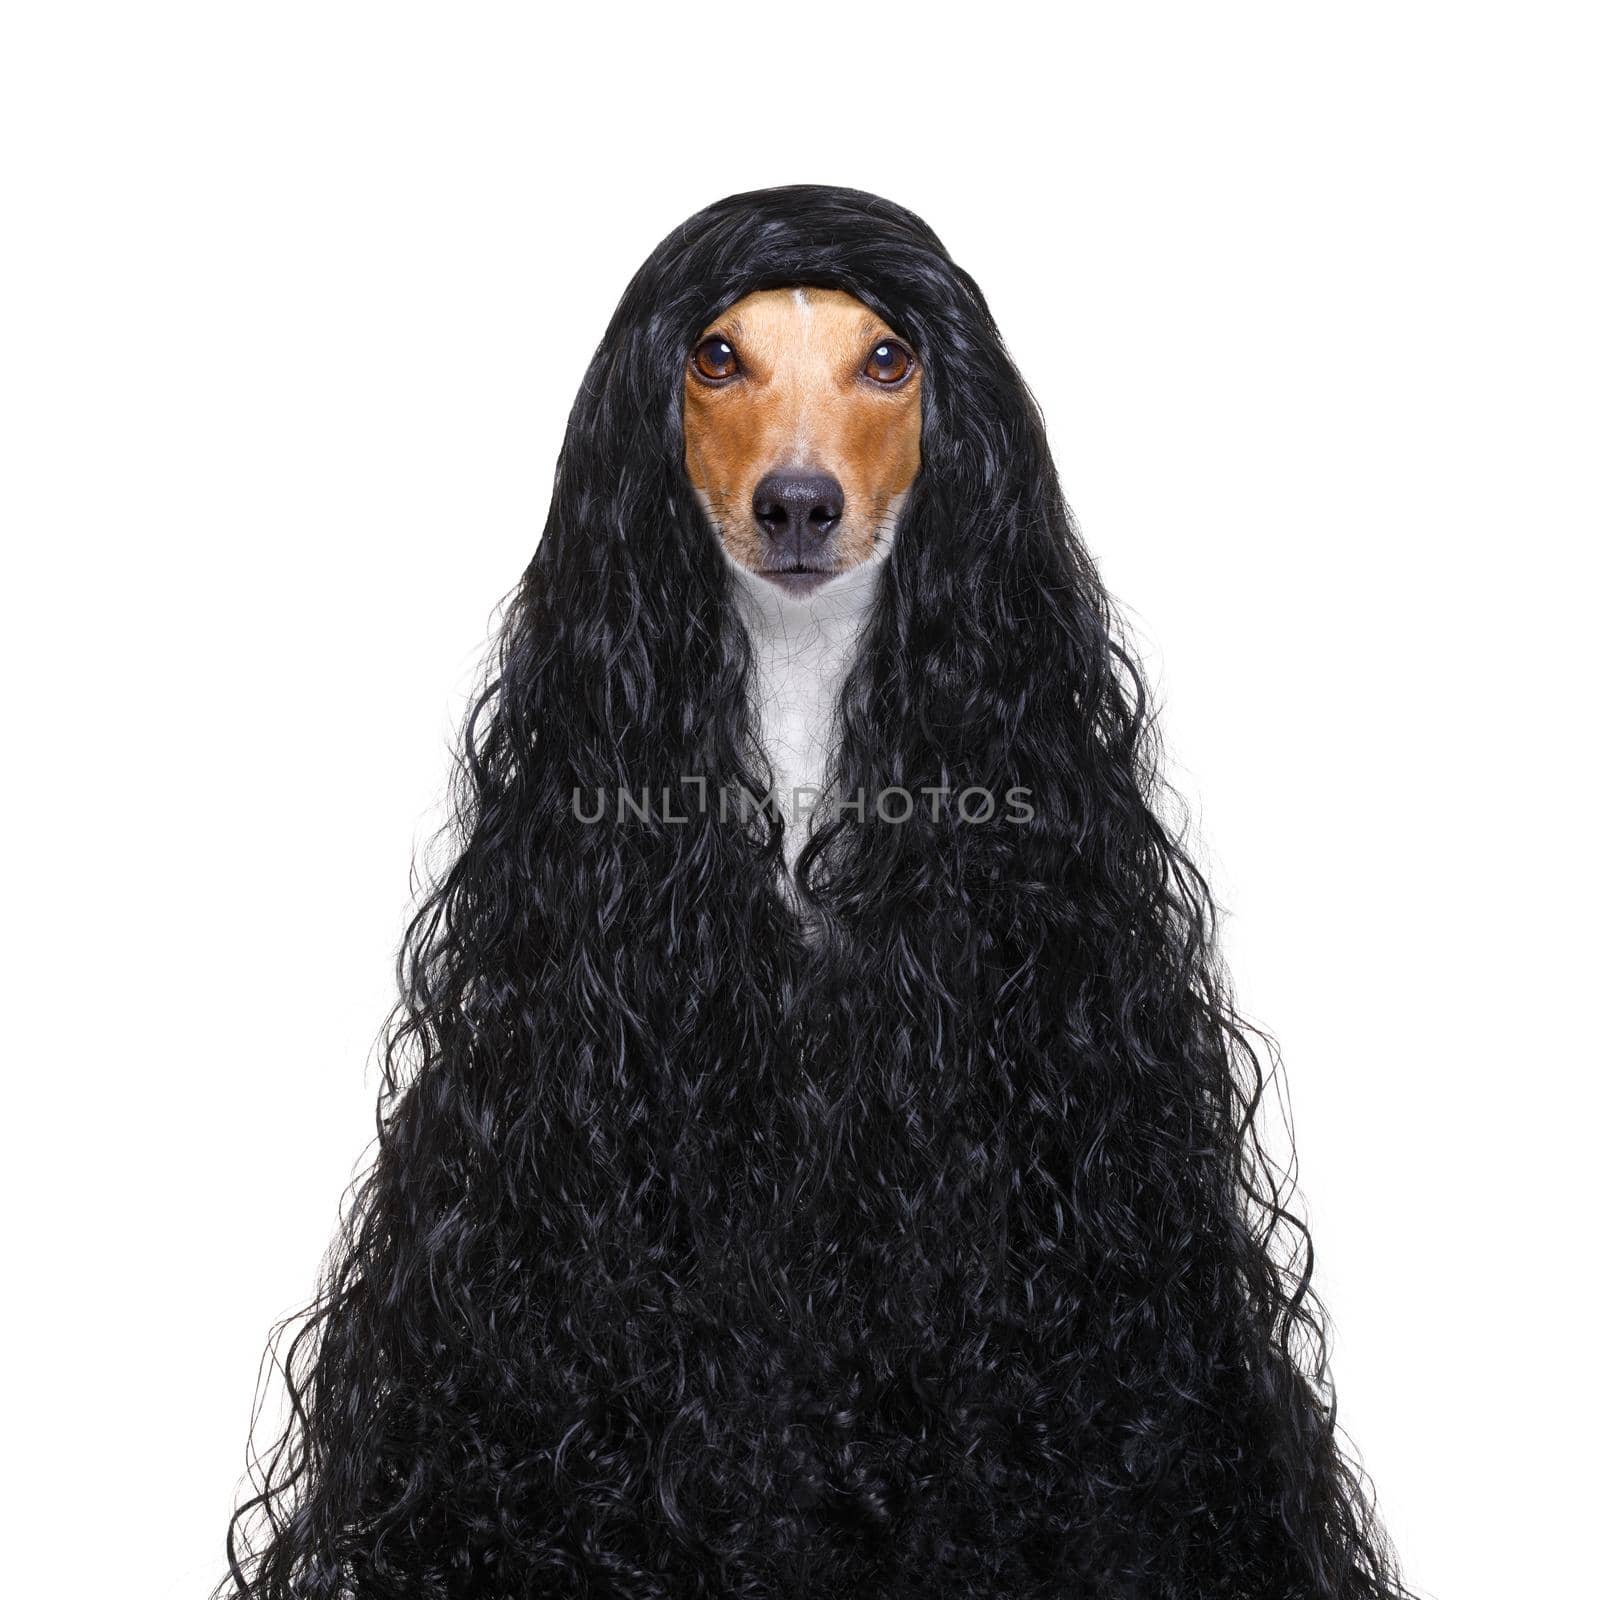 hairdresser dog ready to look beautiful by comb, scissors, dryer, and spray at the wellness spa salon, isolated on white background with very long hair